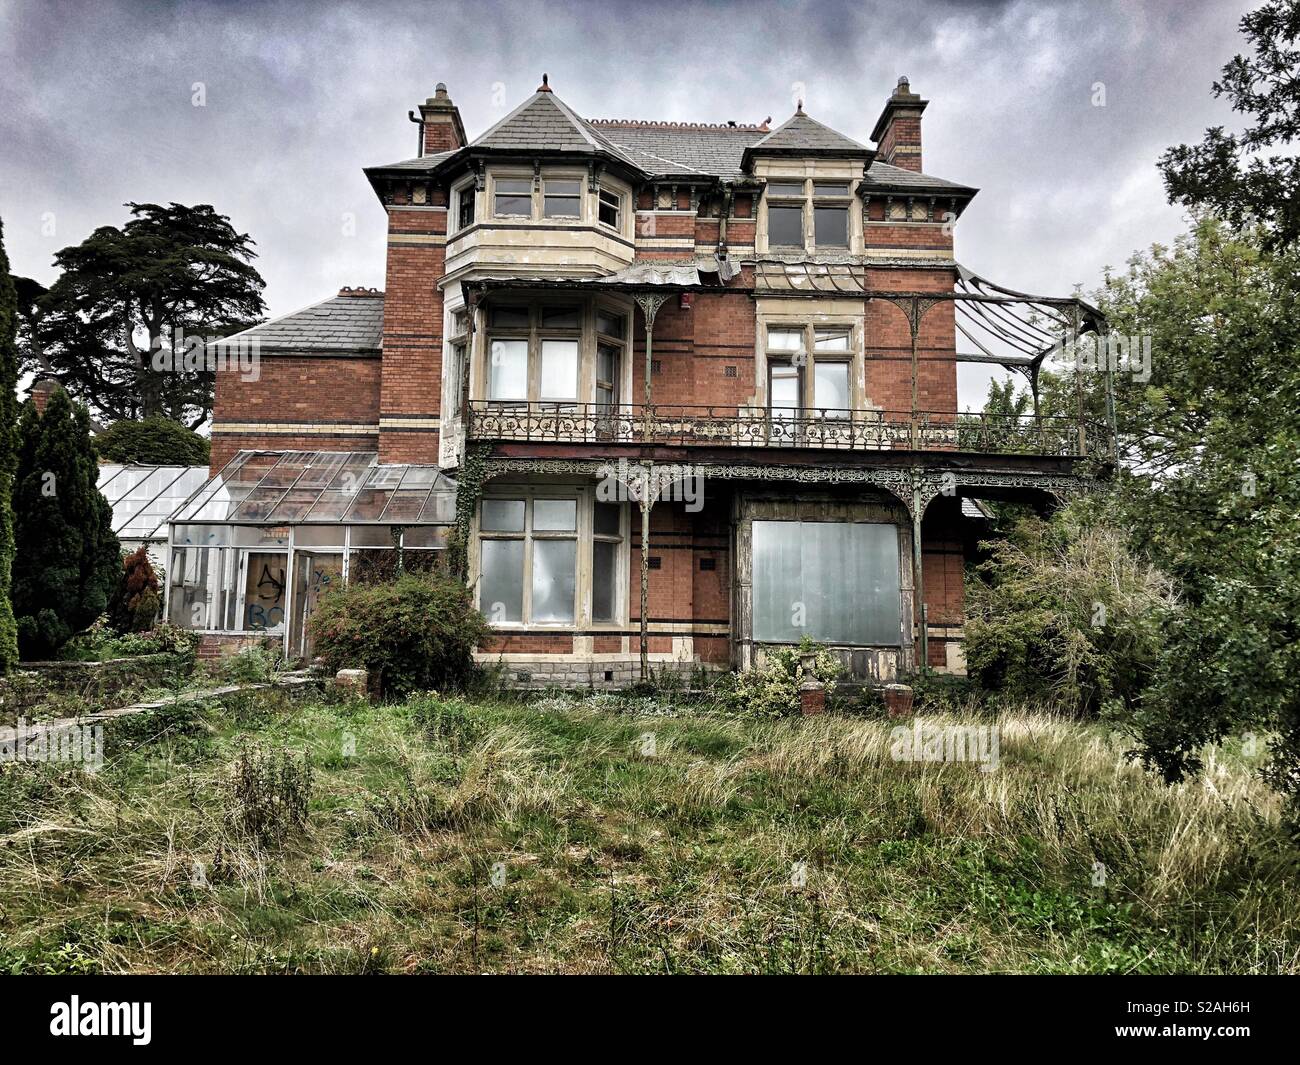 Derelict abandoned old house on Marine Parade in Penarth, Vale of Glamorgan, Wales. Stock Photo